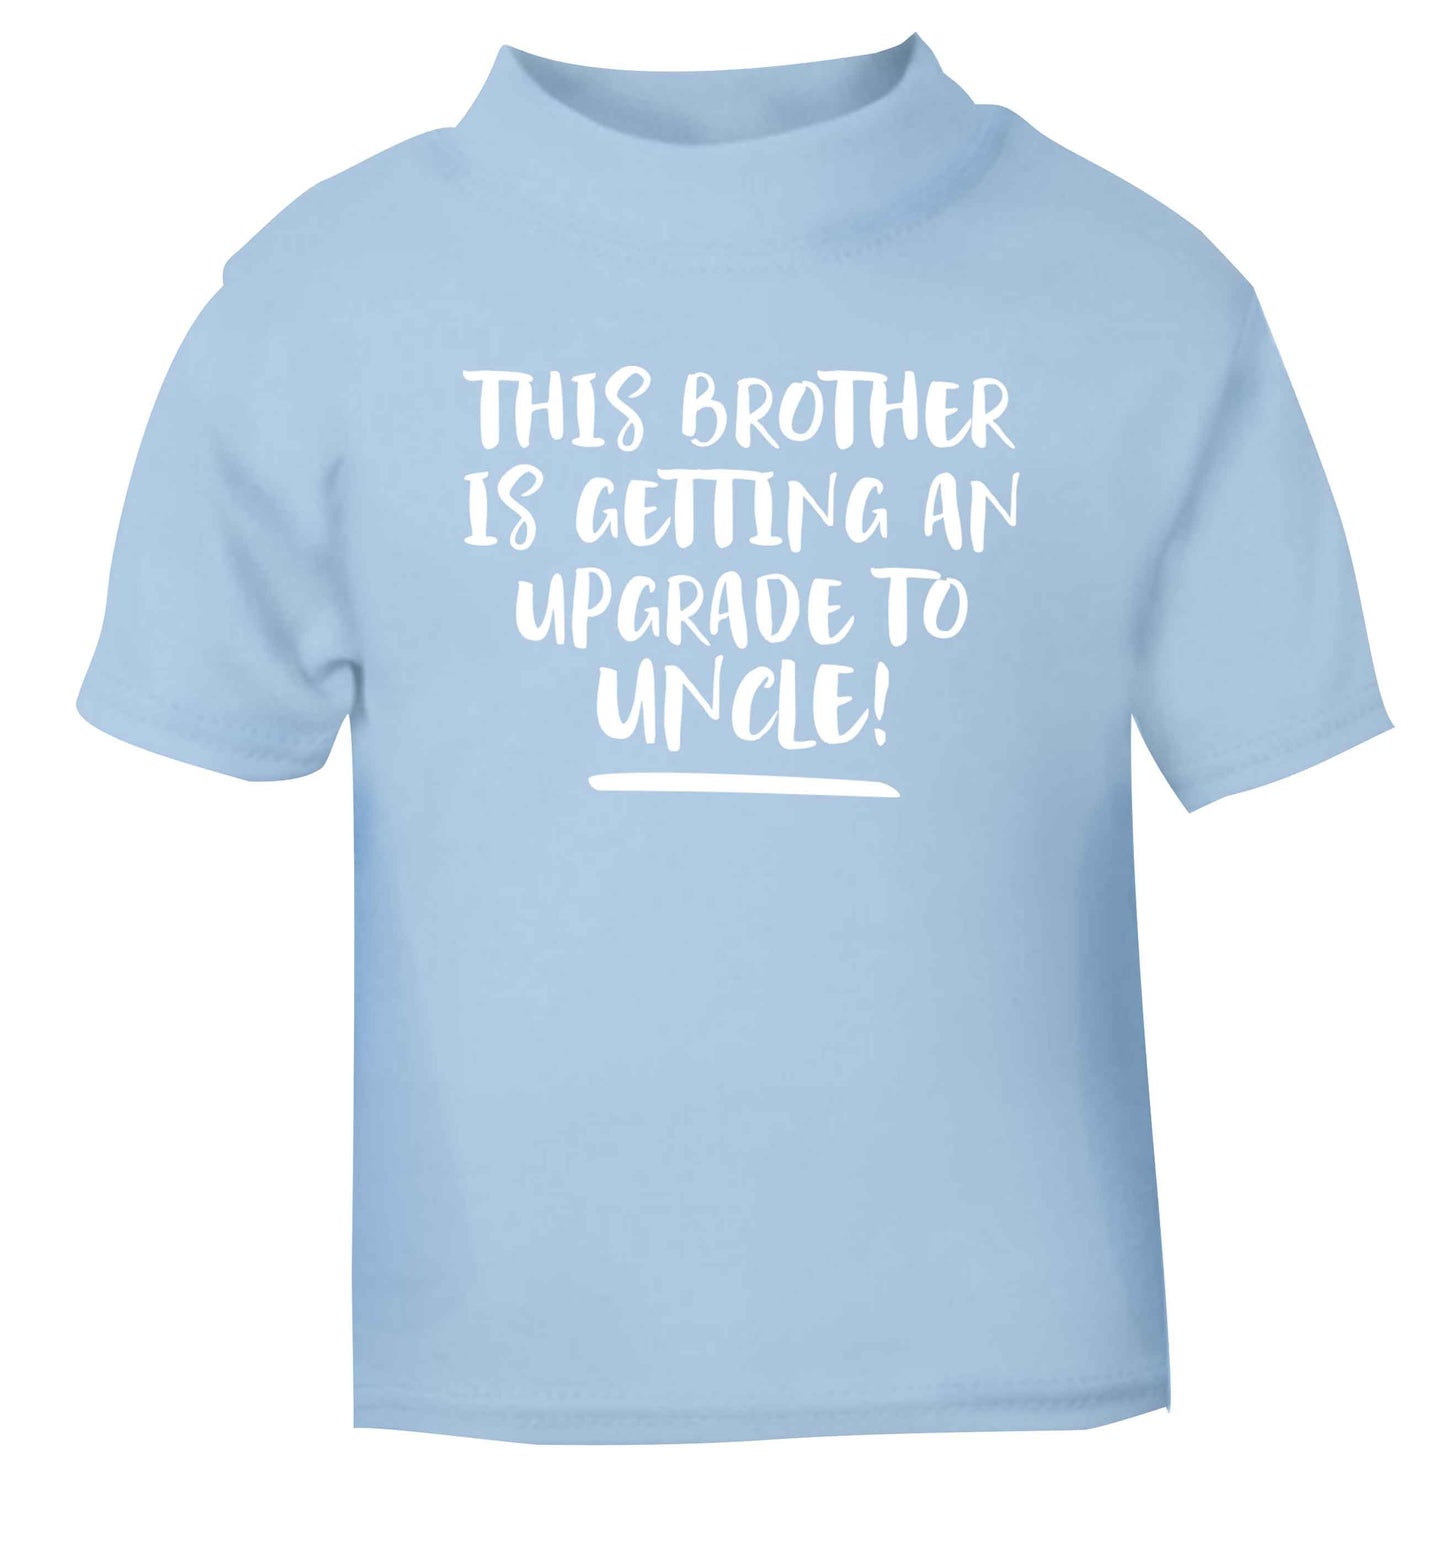 This brother is getting an upgrade to uncle! light blue Baby Toddler Tshirt 2 Years